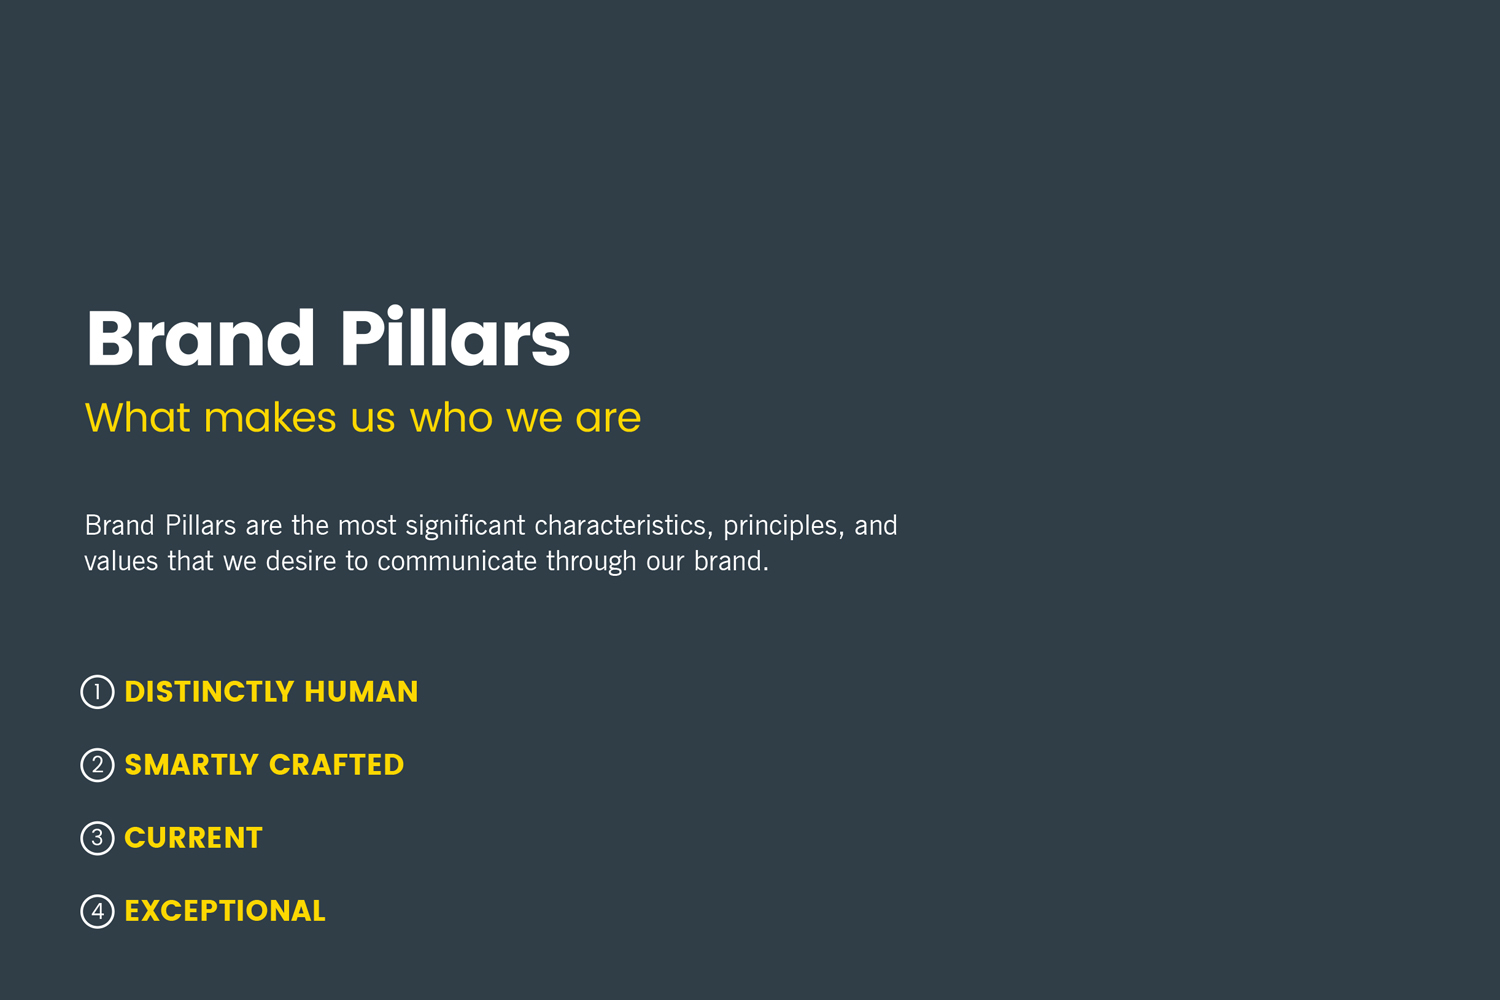 GigRent Brand Pillars: Distinctly Human; Smartly Crafted; Current; Exceptional